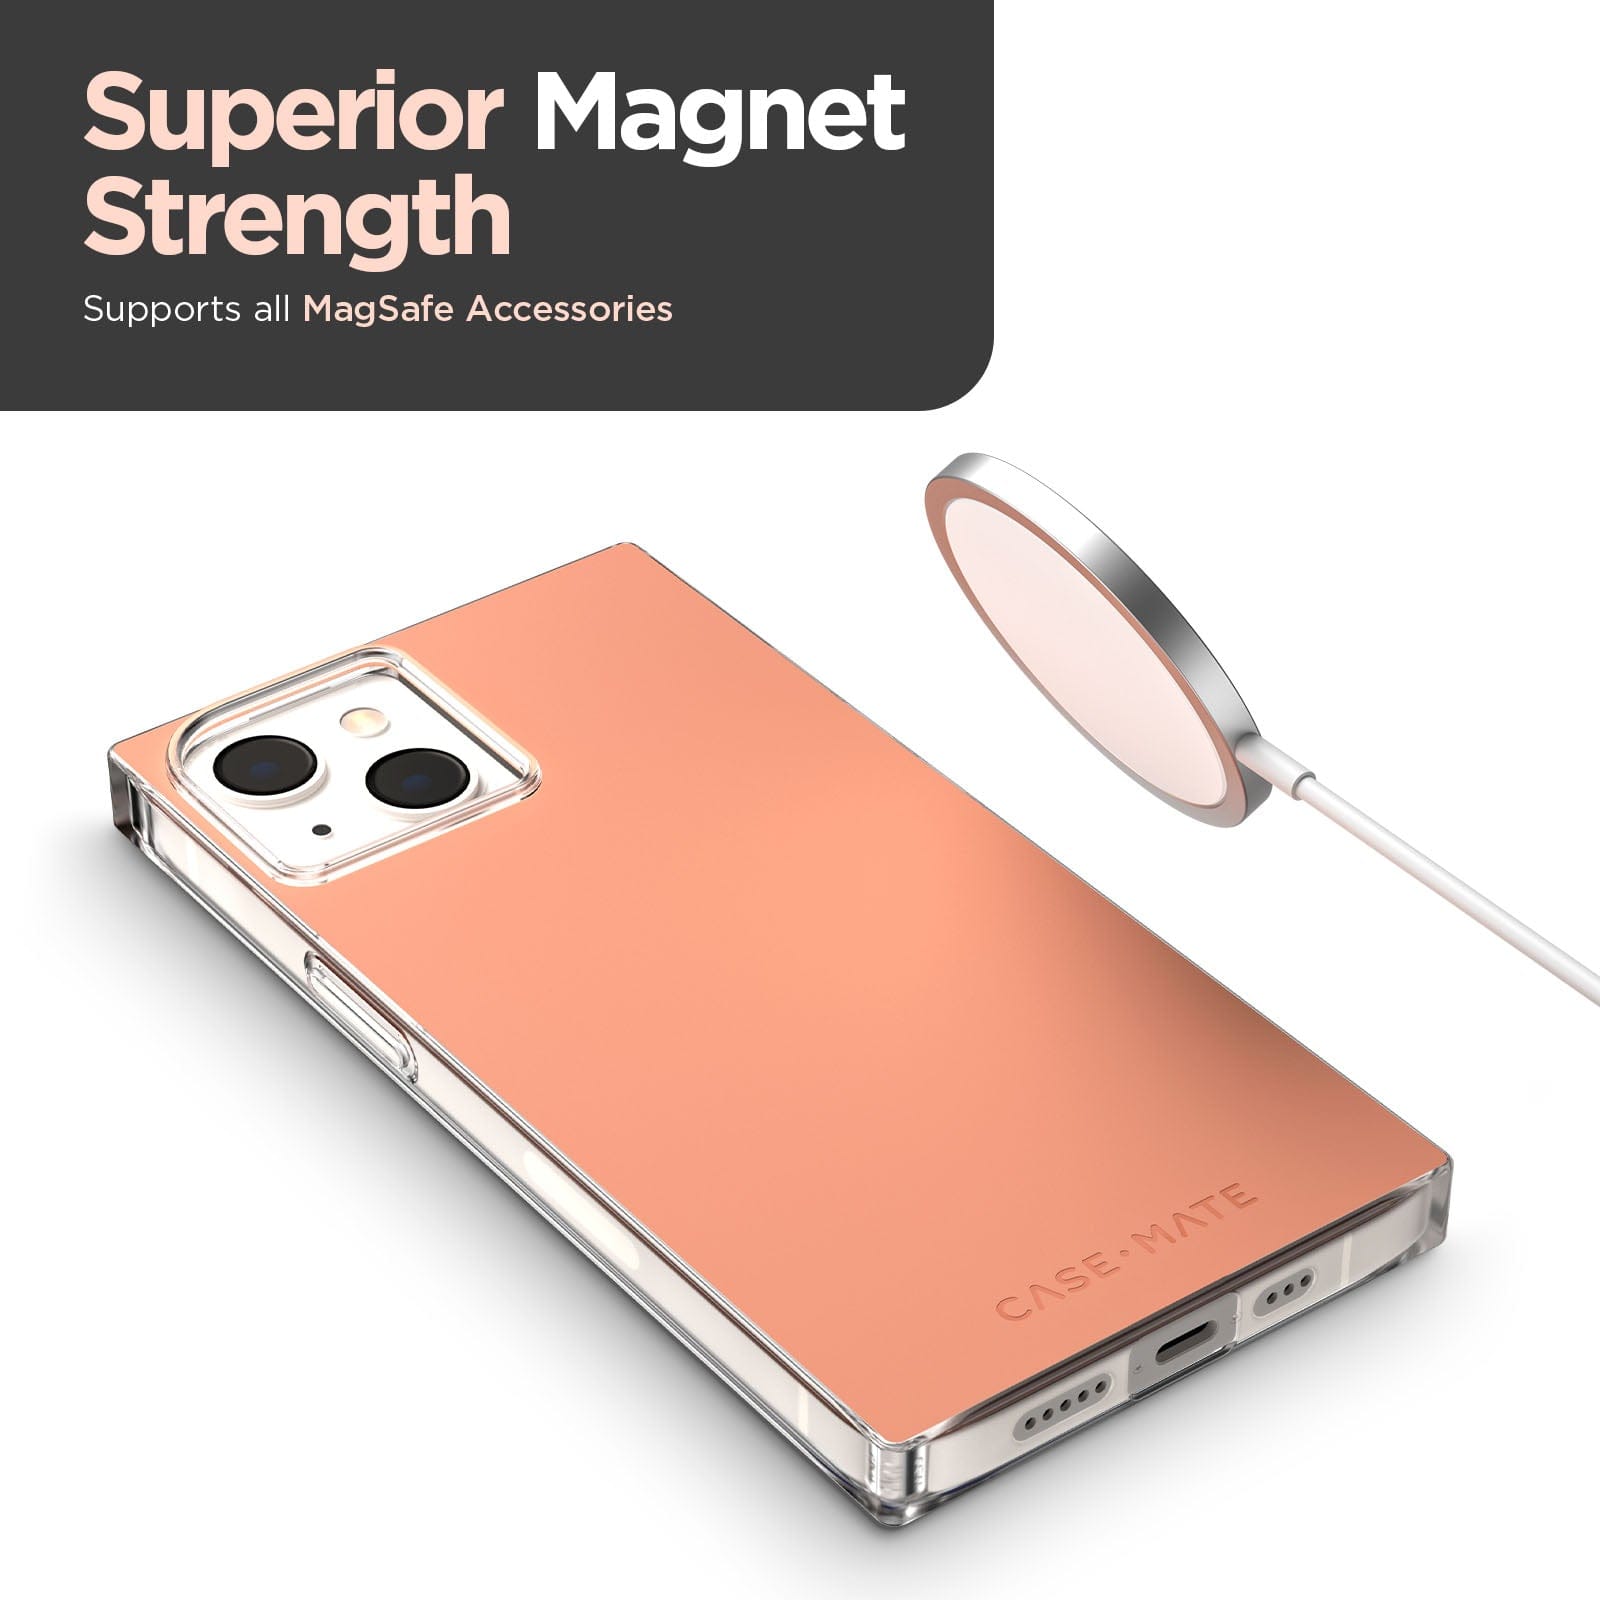 Superior magnets strength supports all MagSafe accessories. color::Clay Pink